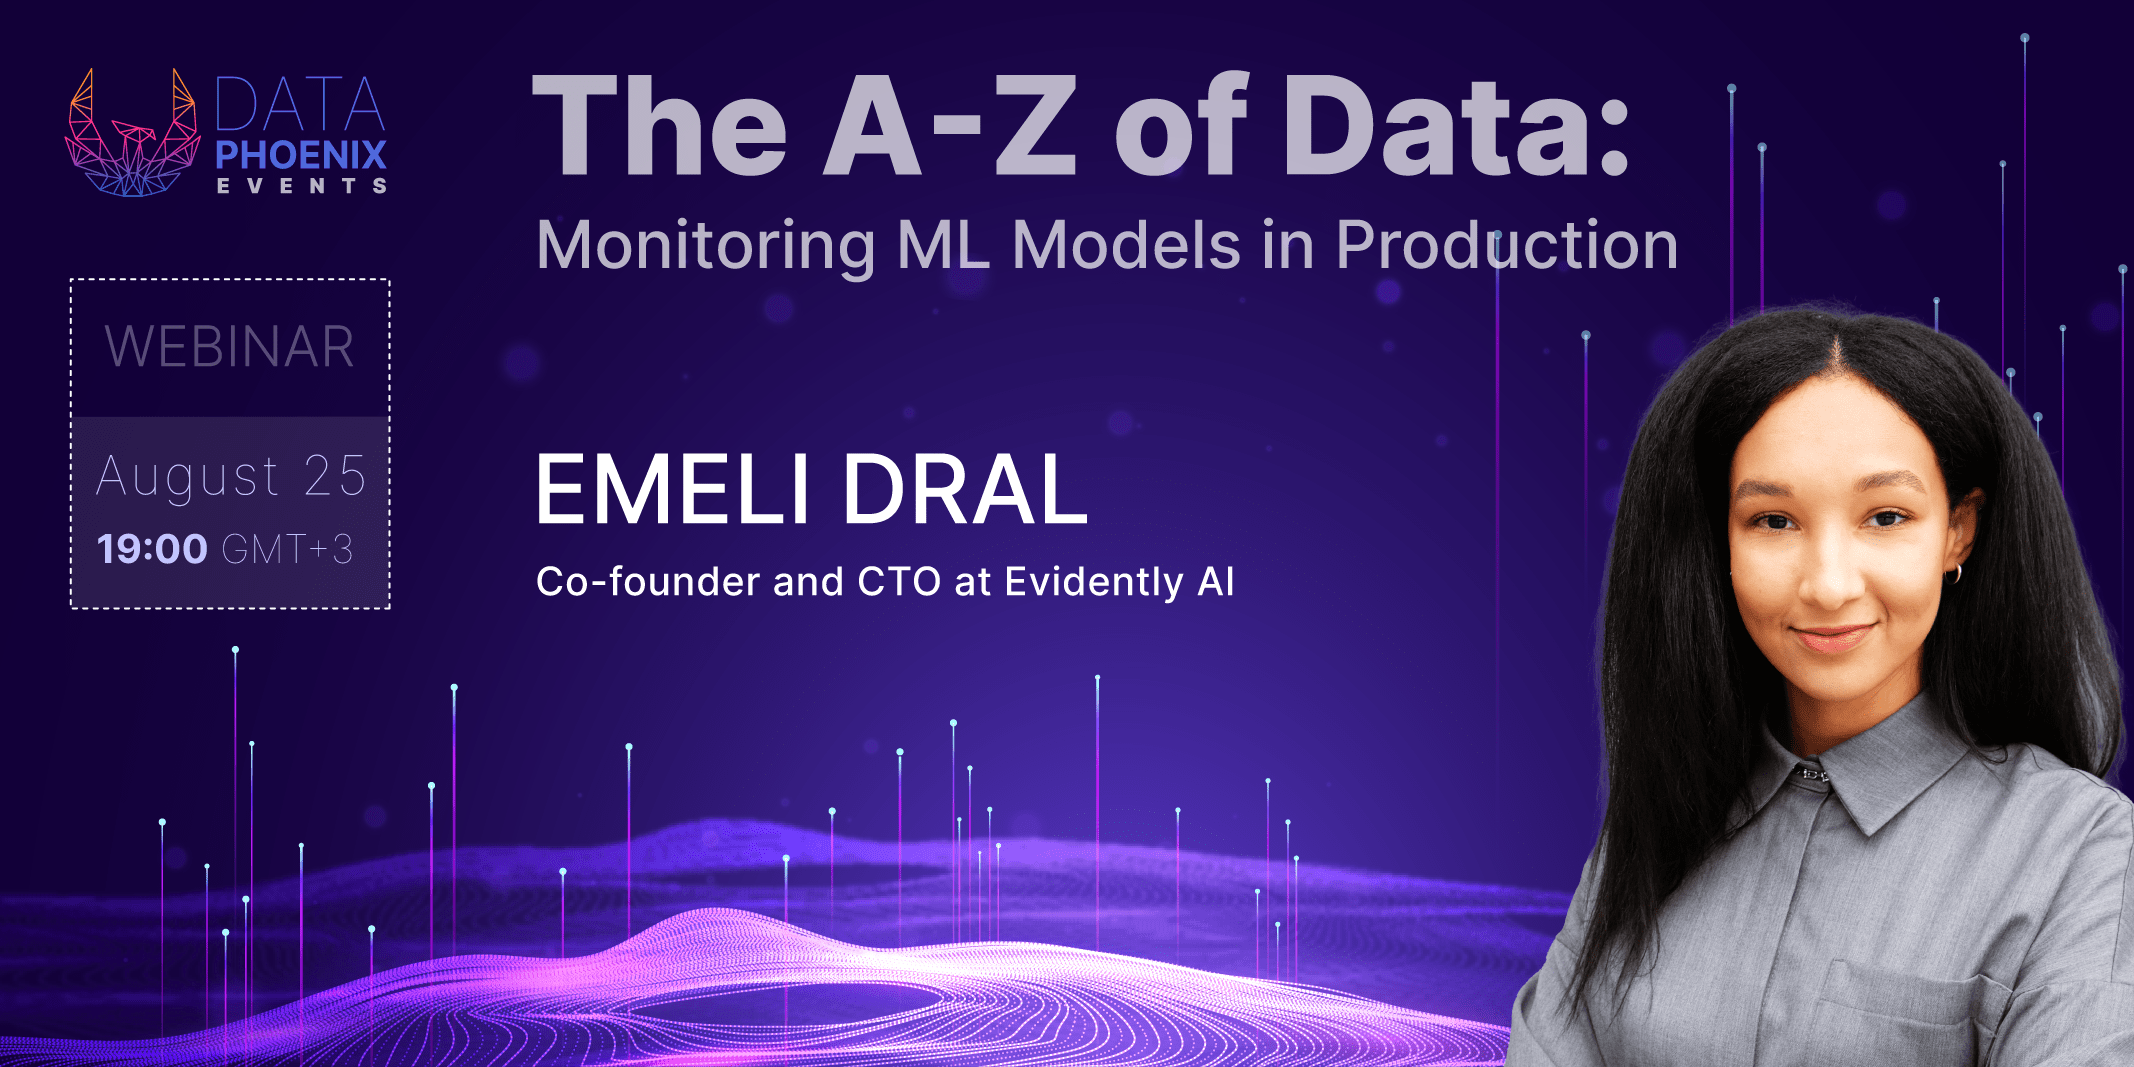 Webinar "The A-Z of Data: Monitoring ML Models in Production"